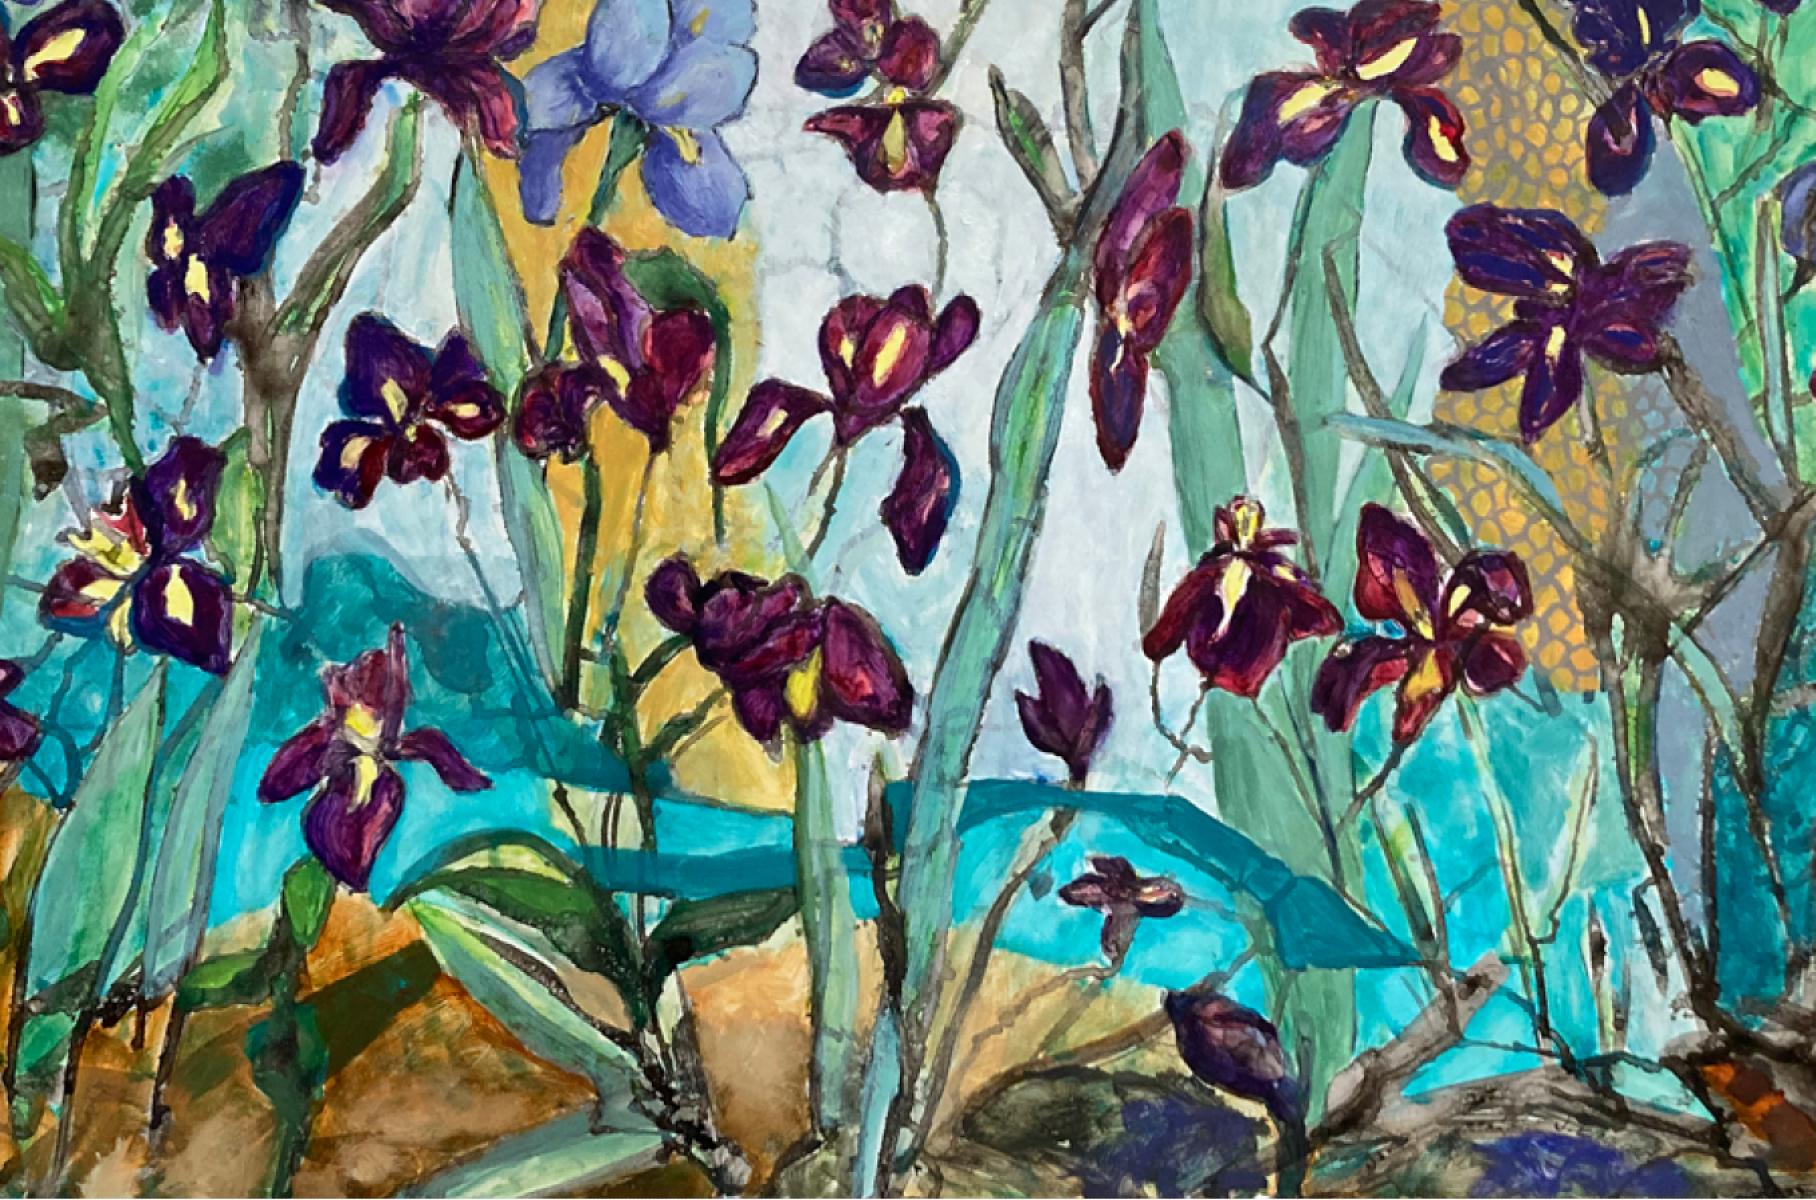 Irises by  Texas artist Julie England is an  Ink and  Watercolor, Oil on Yupo paper. THe size of Irises  is  Image  26” x 40” Framed 31 ¼” x 45 ¼” Art is floated in a white 2” depth gallery frame with OP 3 plexi glazing.    Look for free shipping at